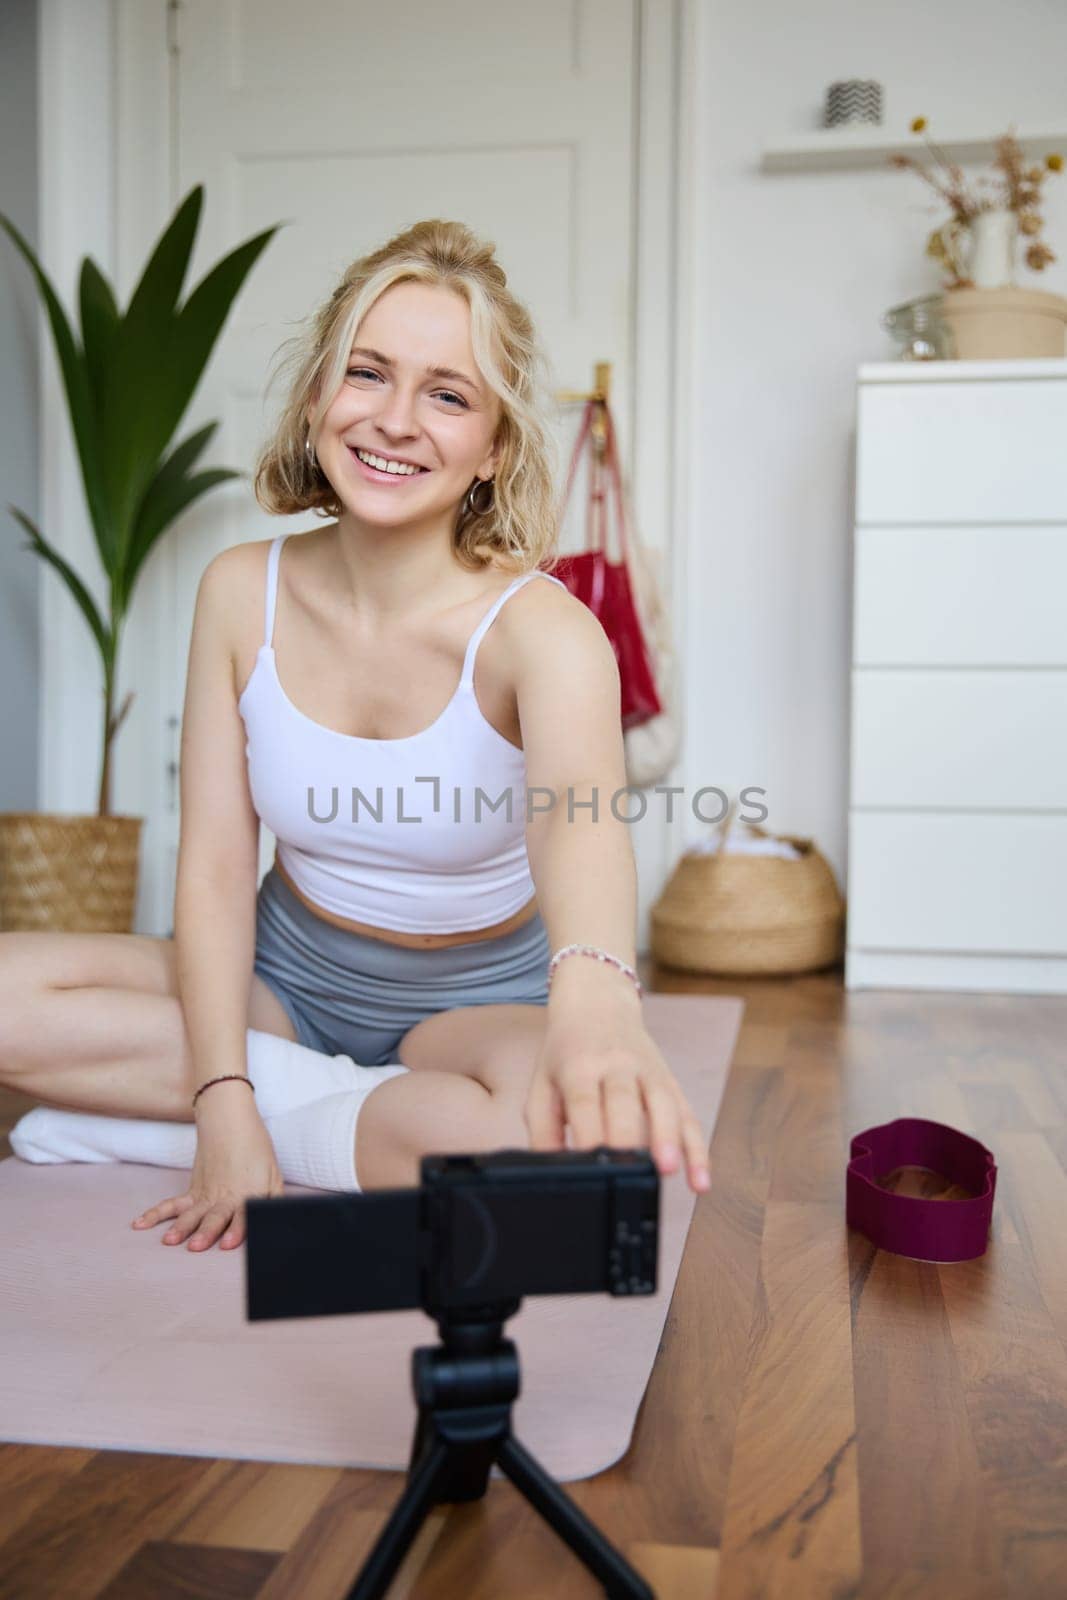 Vertical shot of athletic, fitness woman recording video of herself on digital camera, creating content for social media about workout and home exercises.